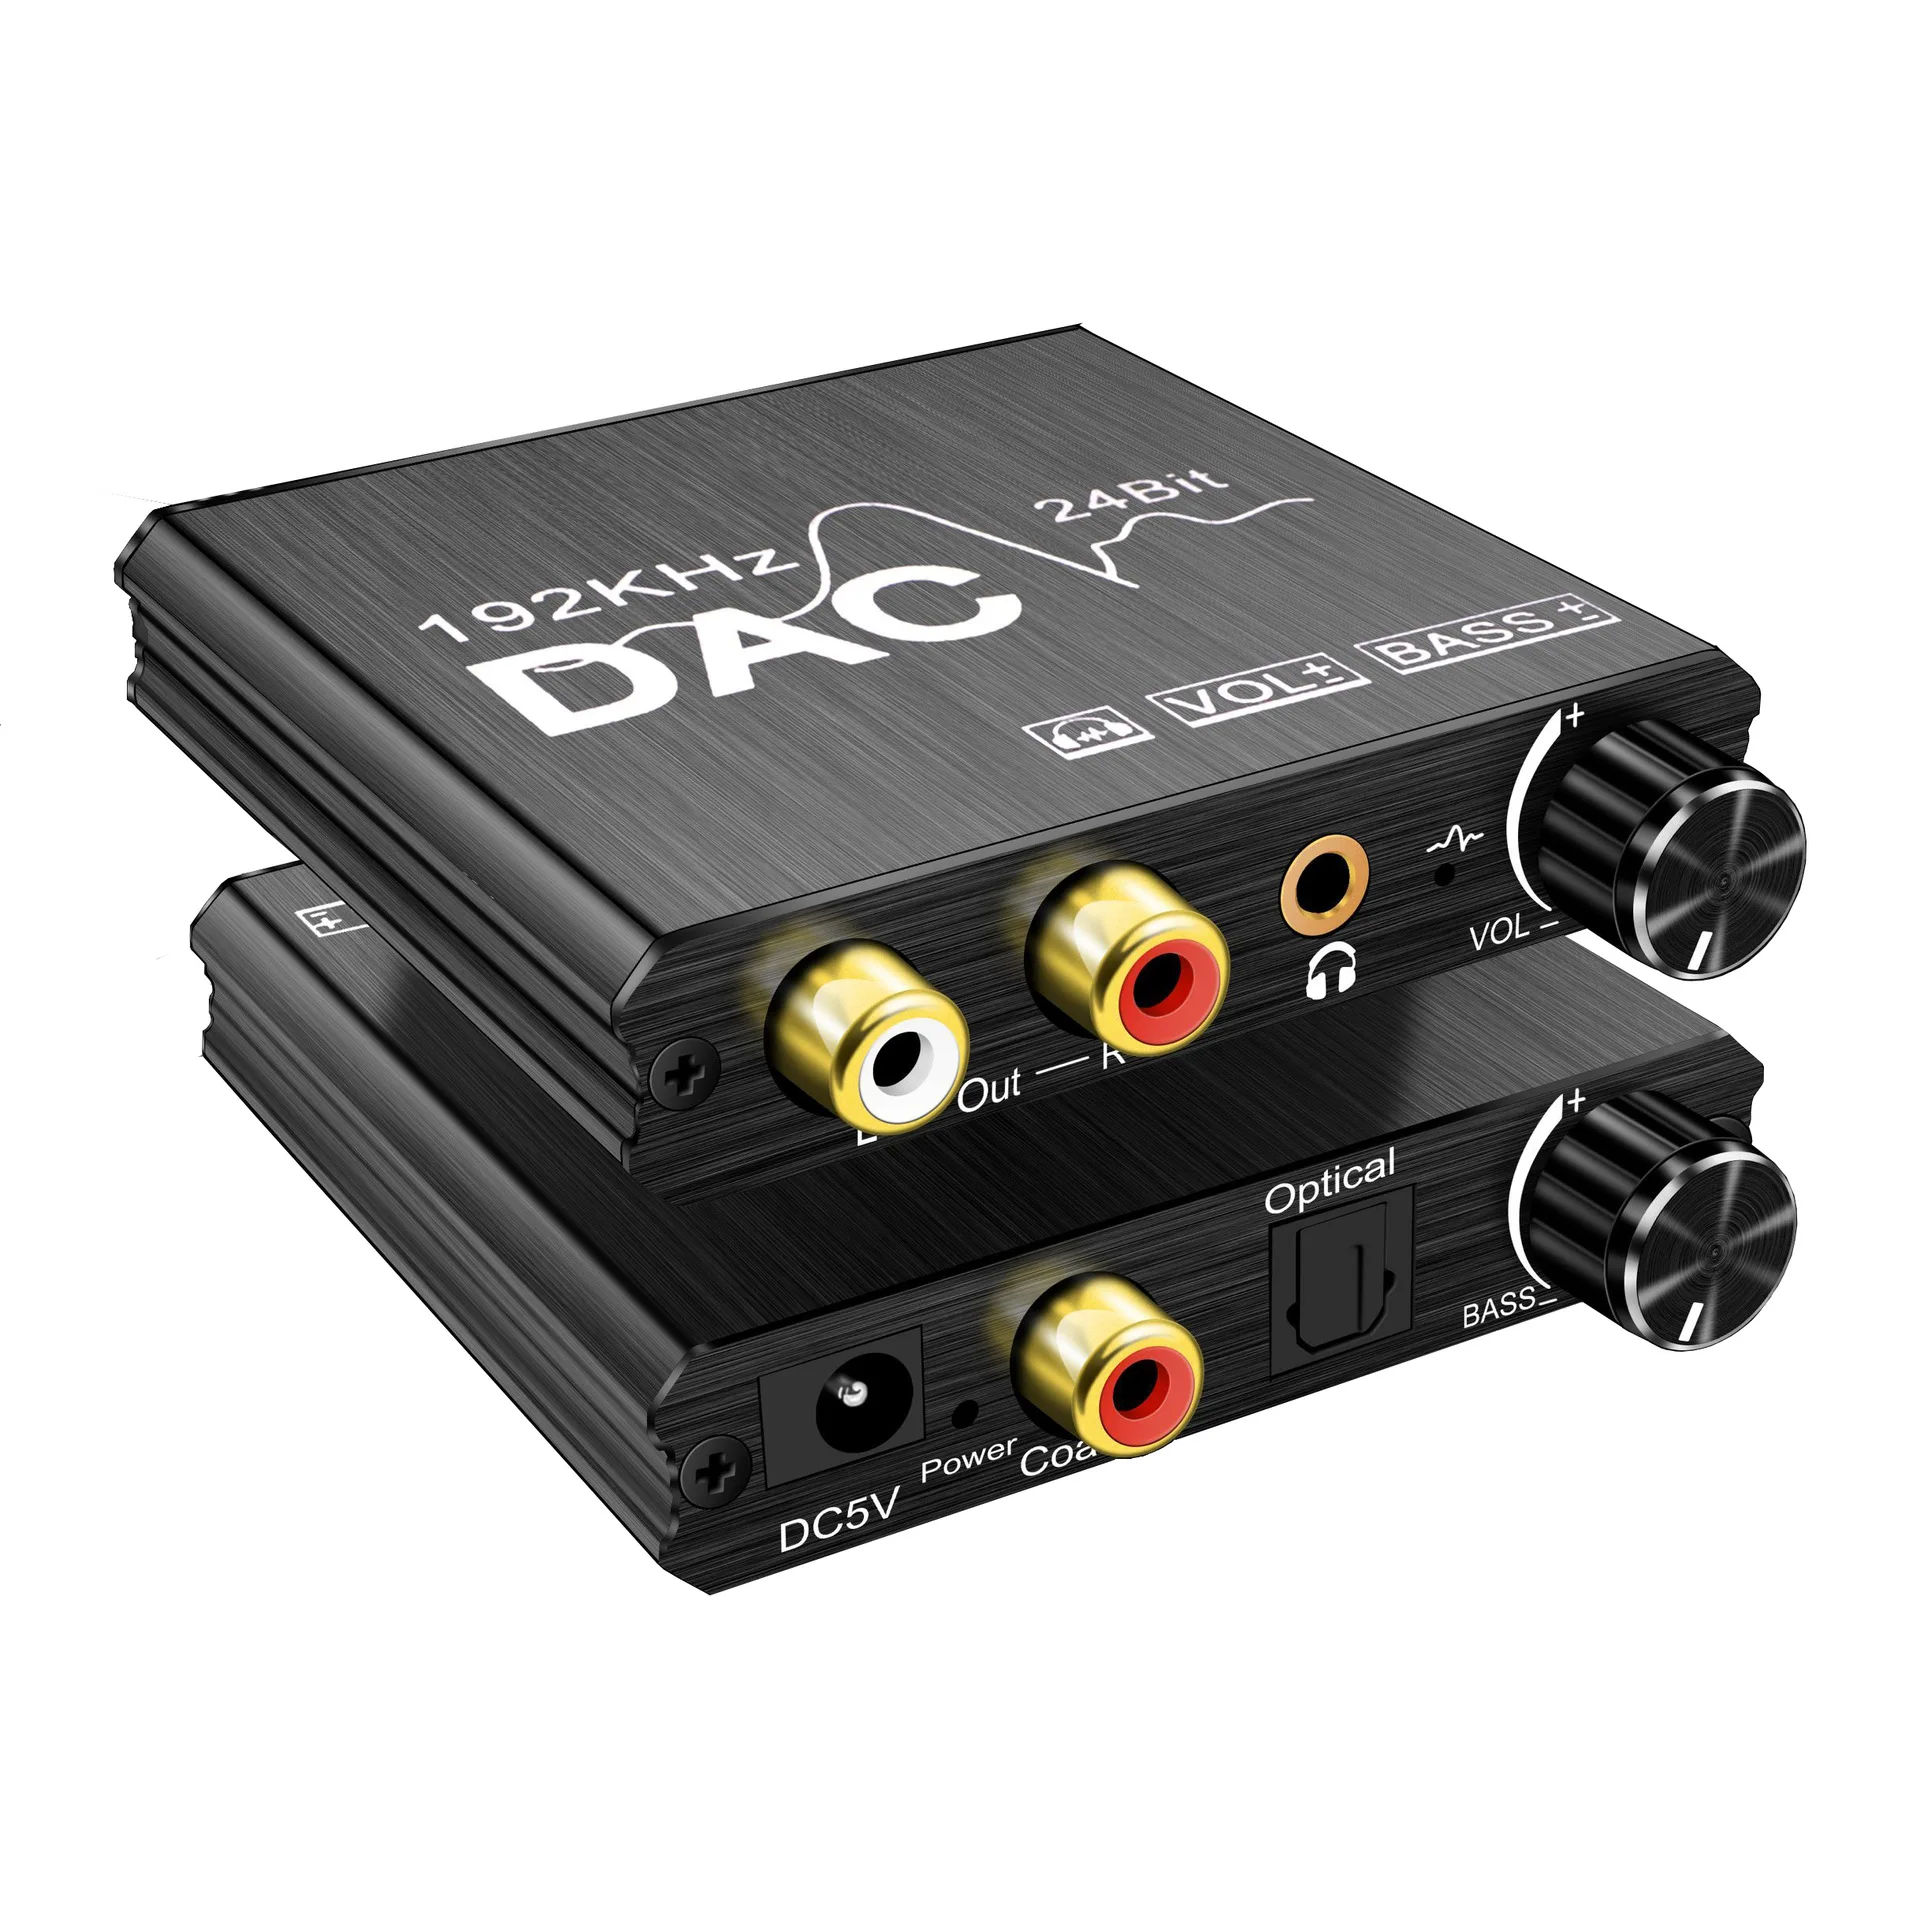 

DAC 192KHz 24Bit Digital to Analog Audio Converter Coaxial SPDIF Optical To 3.5MM L/R RCA Subwoofer Adapter For TV PS4